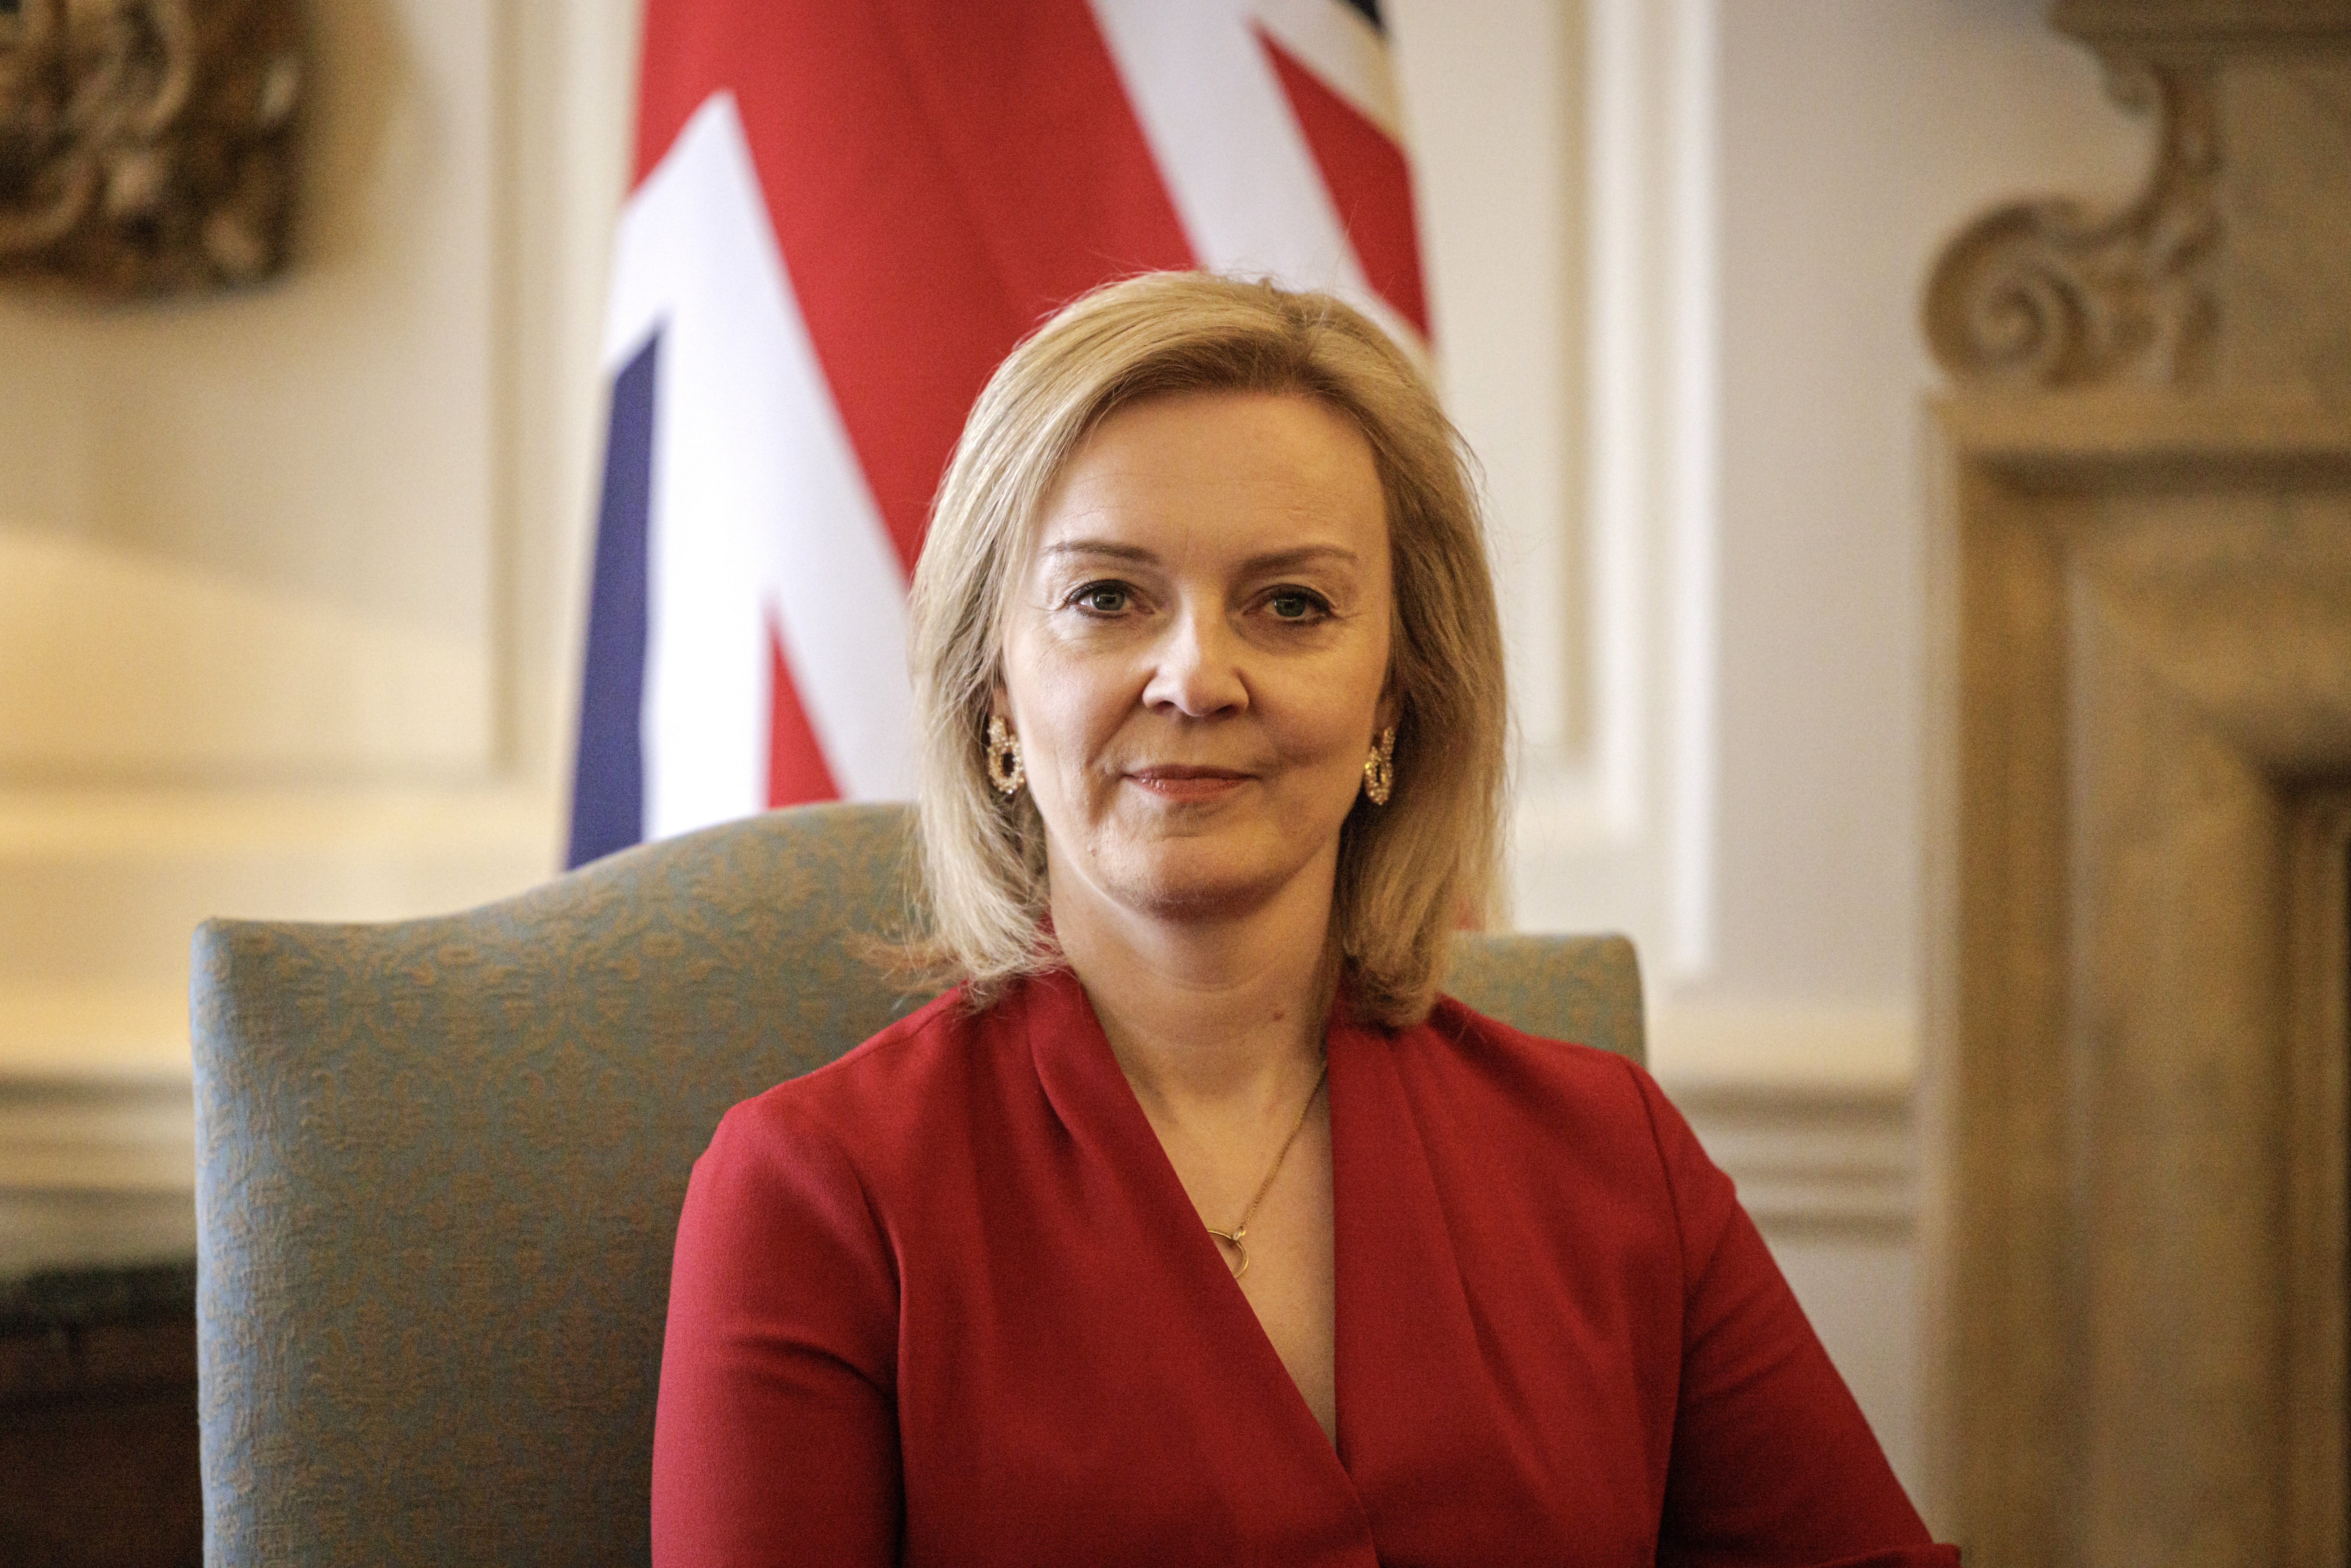 Liz Truss announced sanctions against the Duma on March 11 (Rob Pinney/PA)